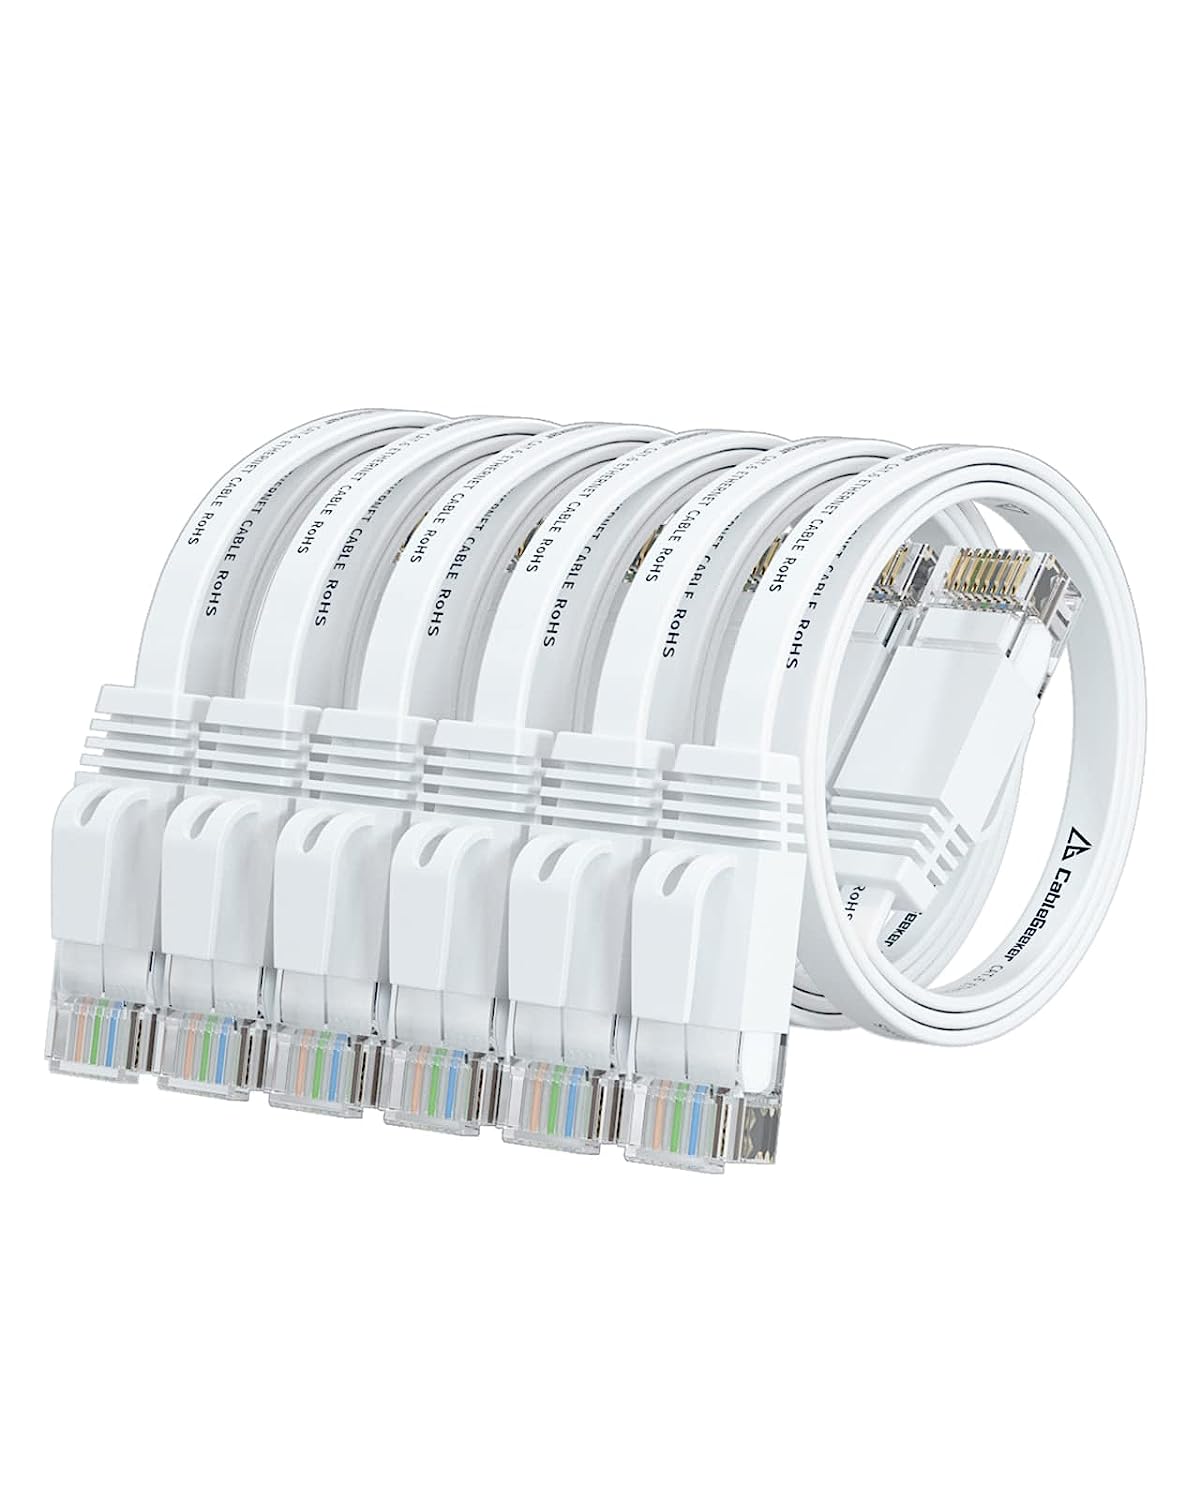 Cat 6 Ethernet Cable 1.5ft (6 Pack) (at a Cat5e Price [...]